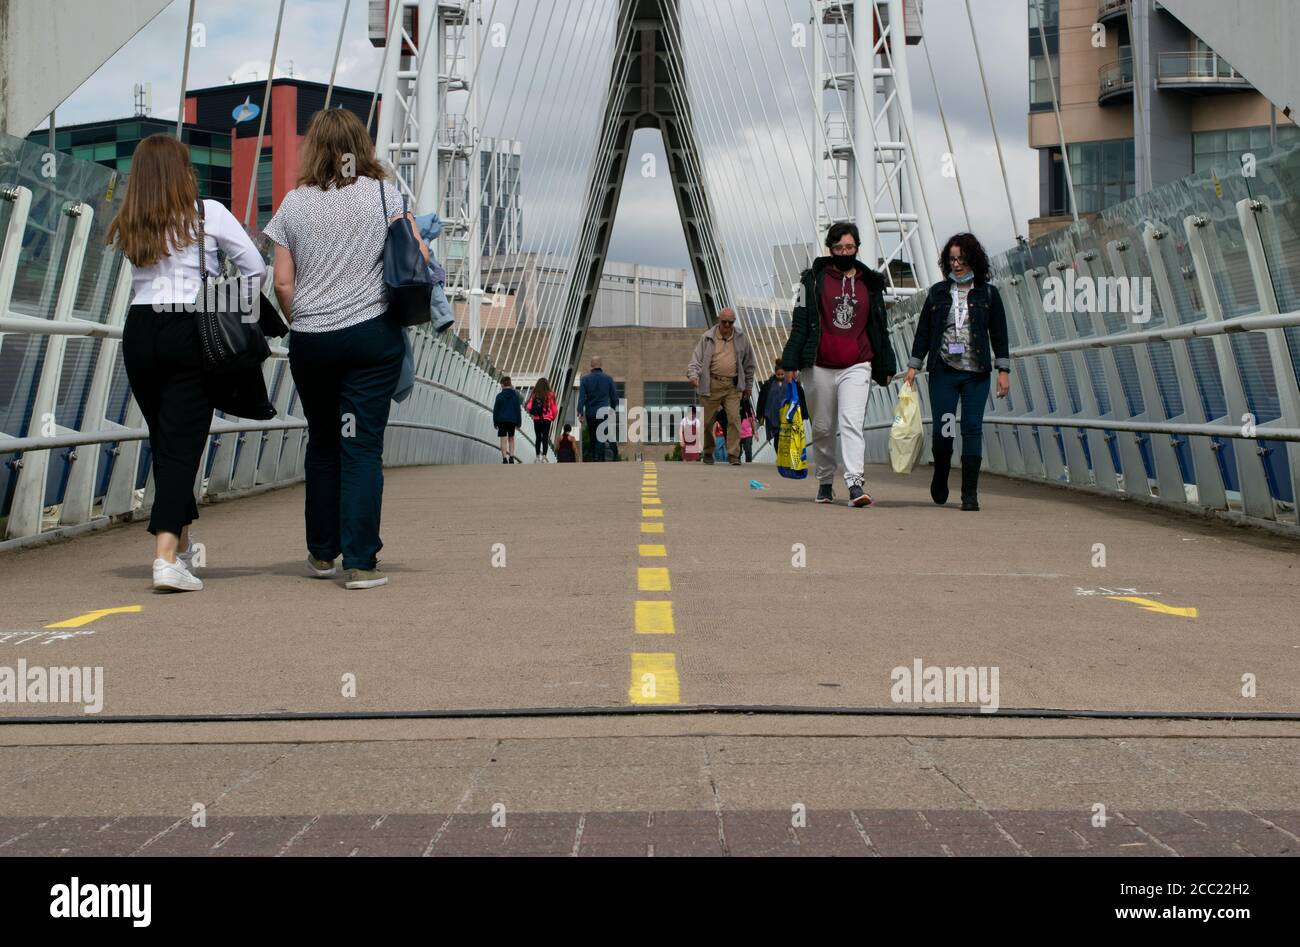 Lift bridge with dividing line and sign showing direction of people walking to minimise contact and social distance during pandemic. Manchester, UK Stock Photo